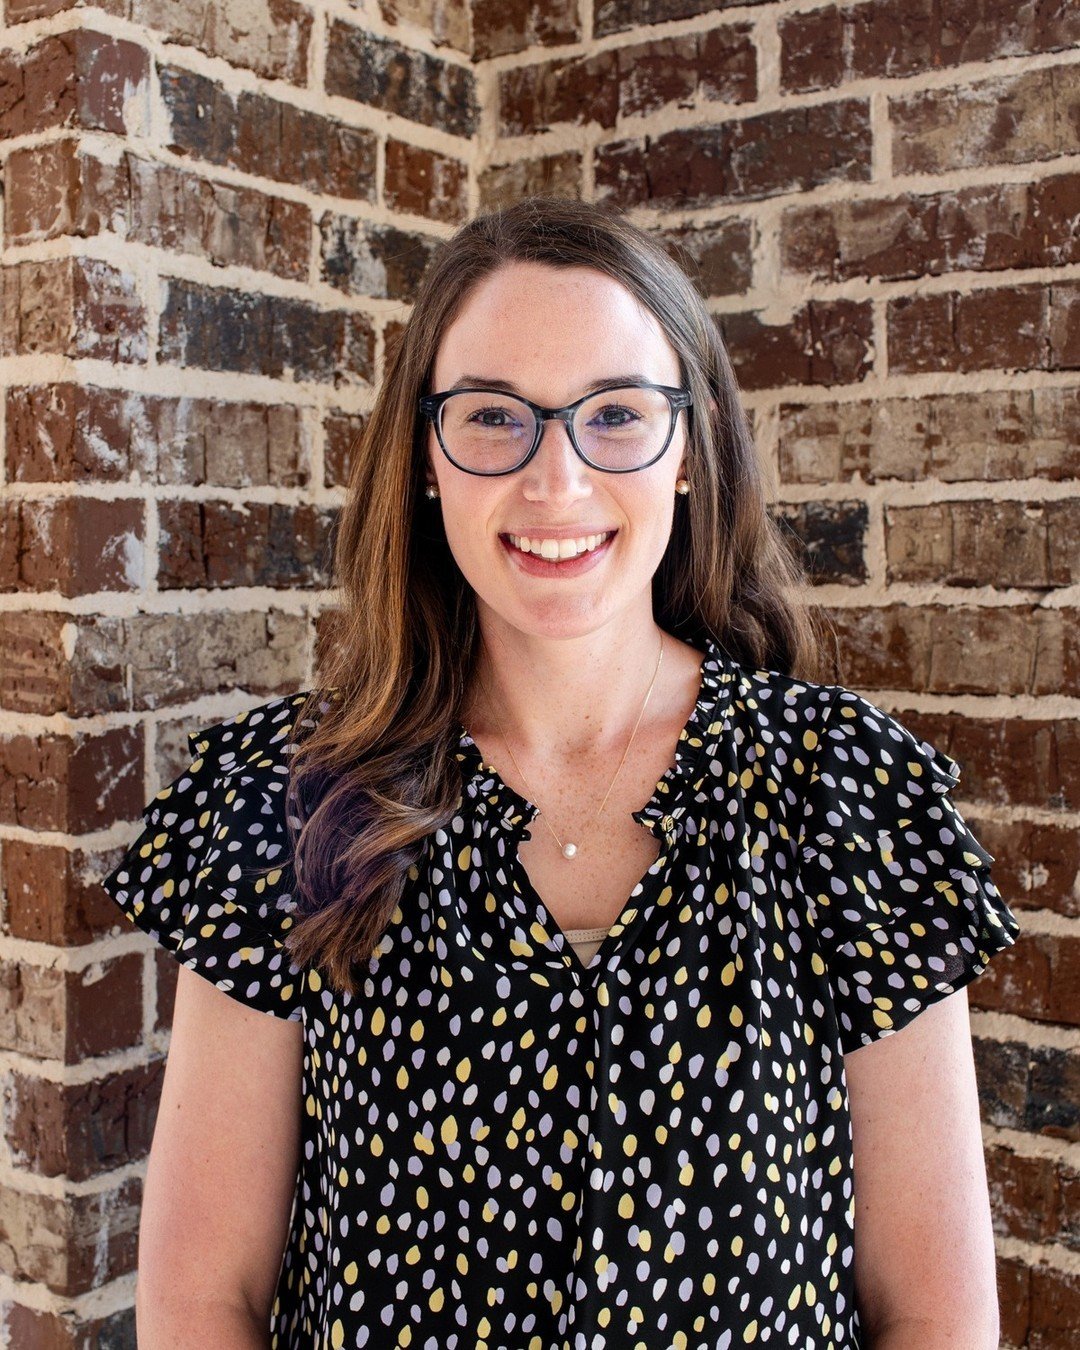 Longview Eye Associates is excited to welcome Dr. Shelby Tomek to our team!

Shelby grew up in White Oak, Texas. She attended Texas A&amp;M University in College Station, Texas where she graduated with a BS in Biomedical Science and a minor in mathem